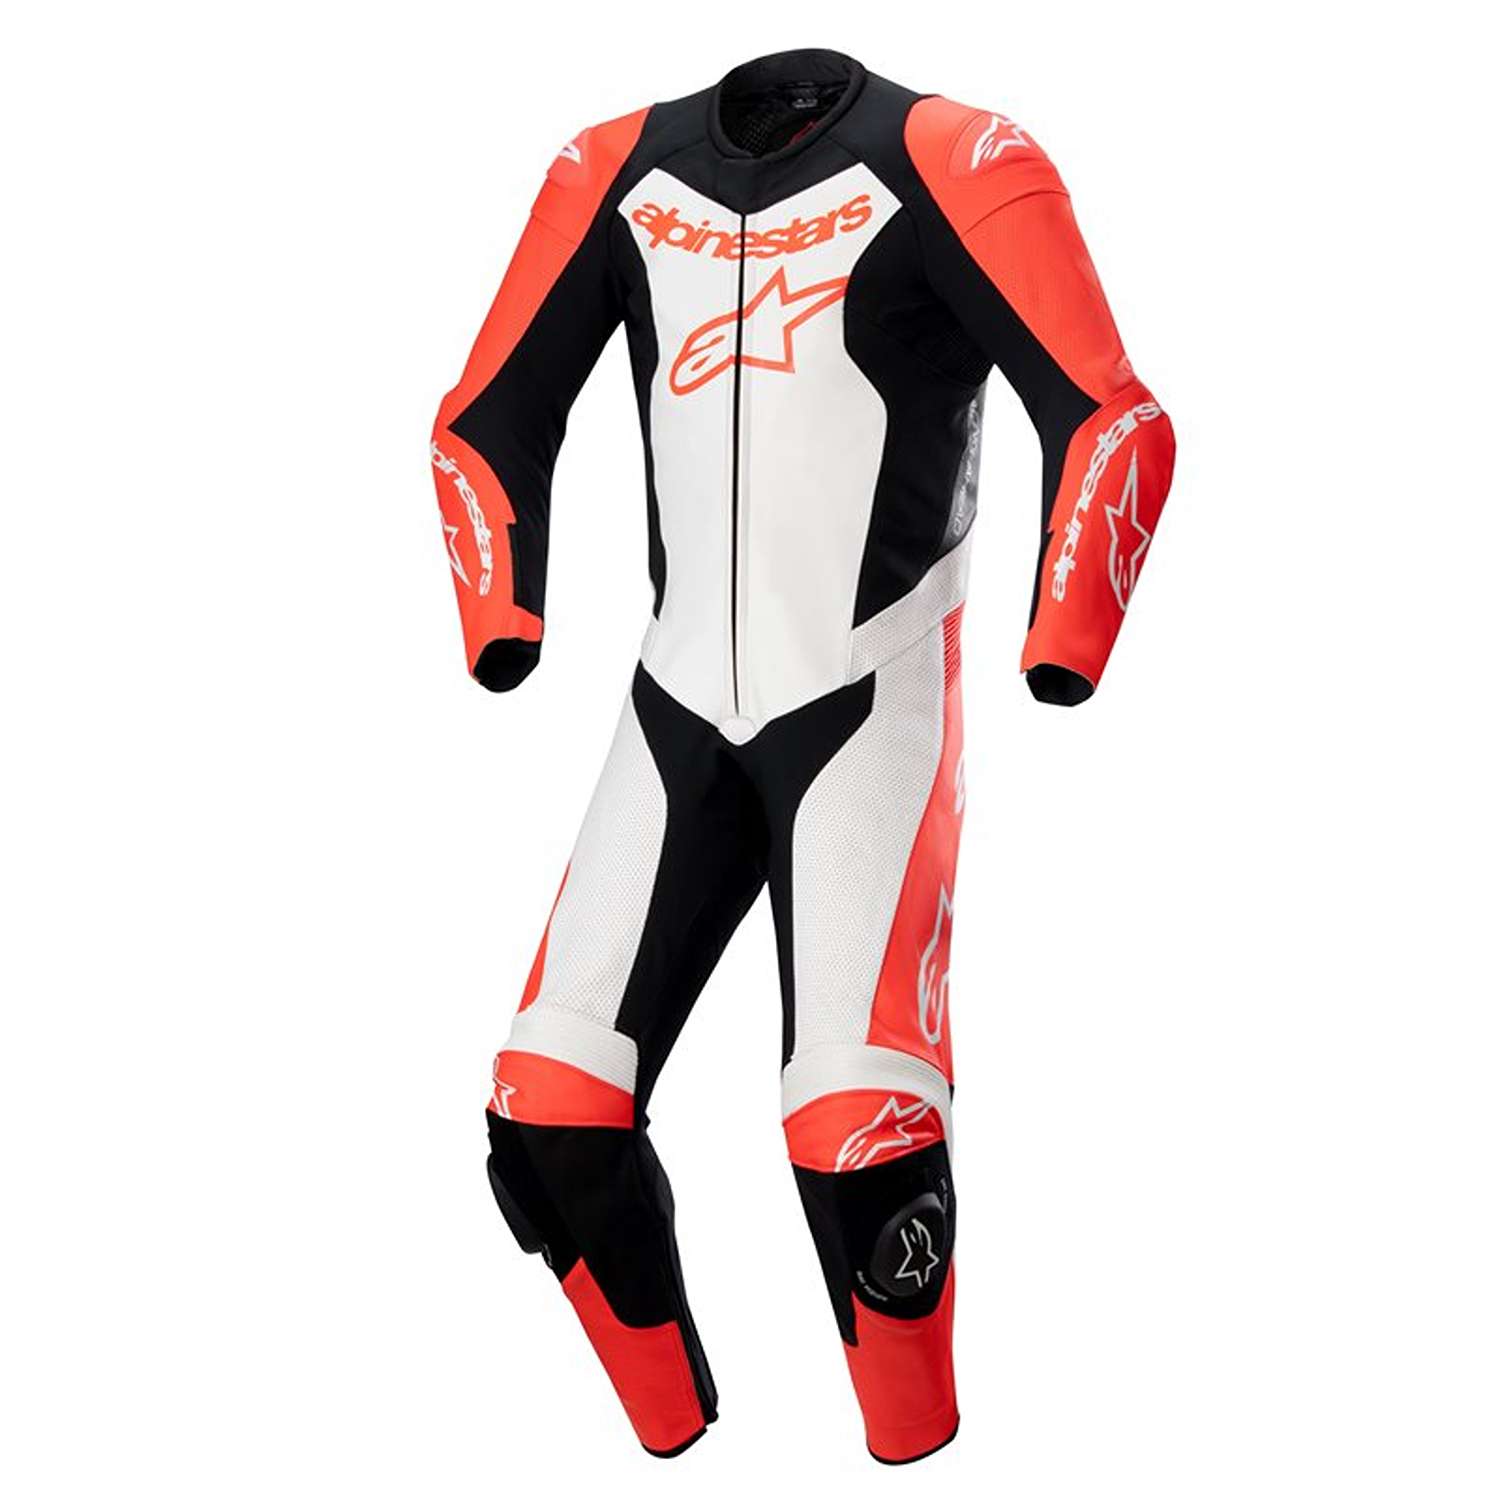 Image of Alpinestars Gp Force Lurv 1Pc Leather Suit Red Fluo White Black Size 52 ID 8059347311579